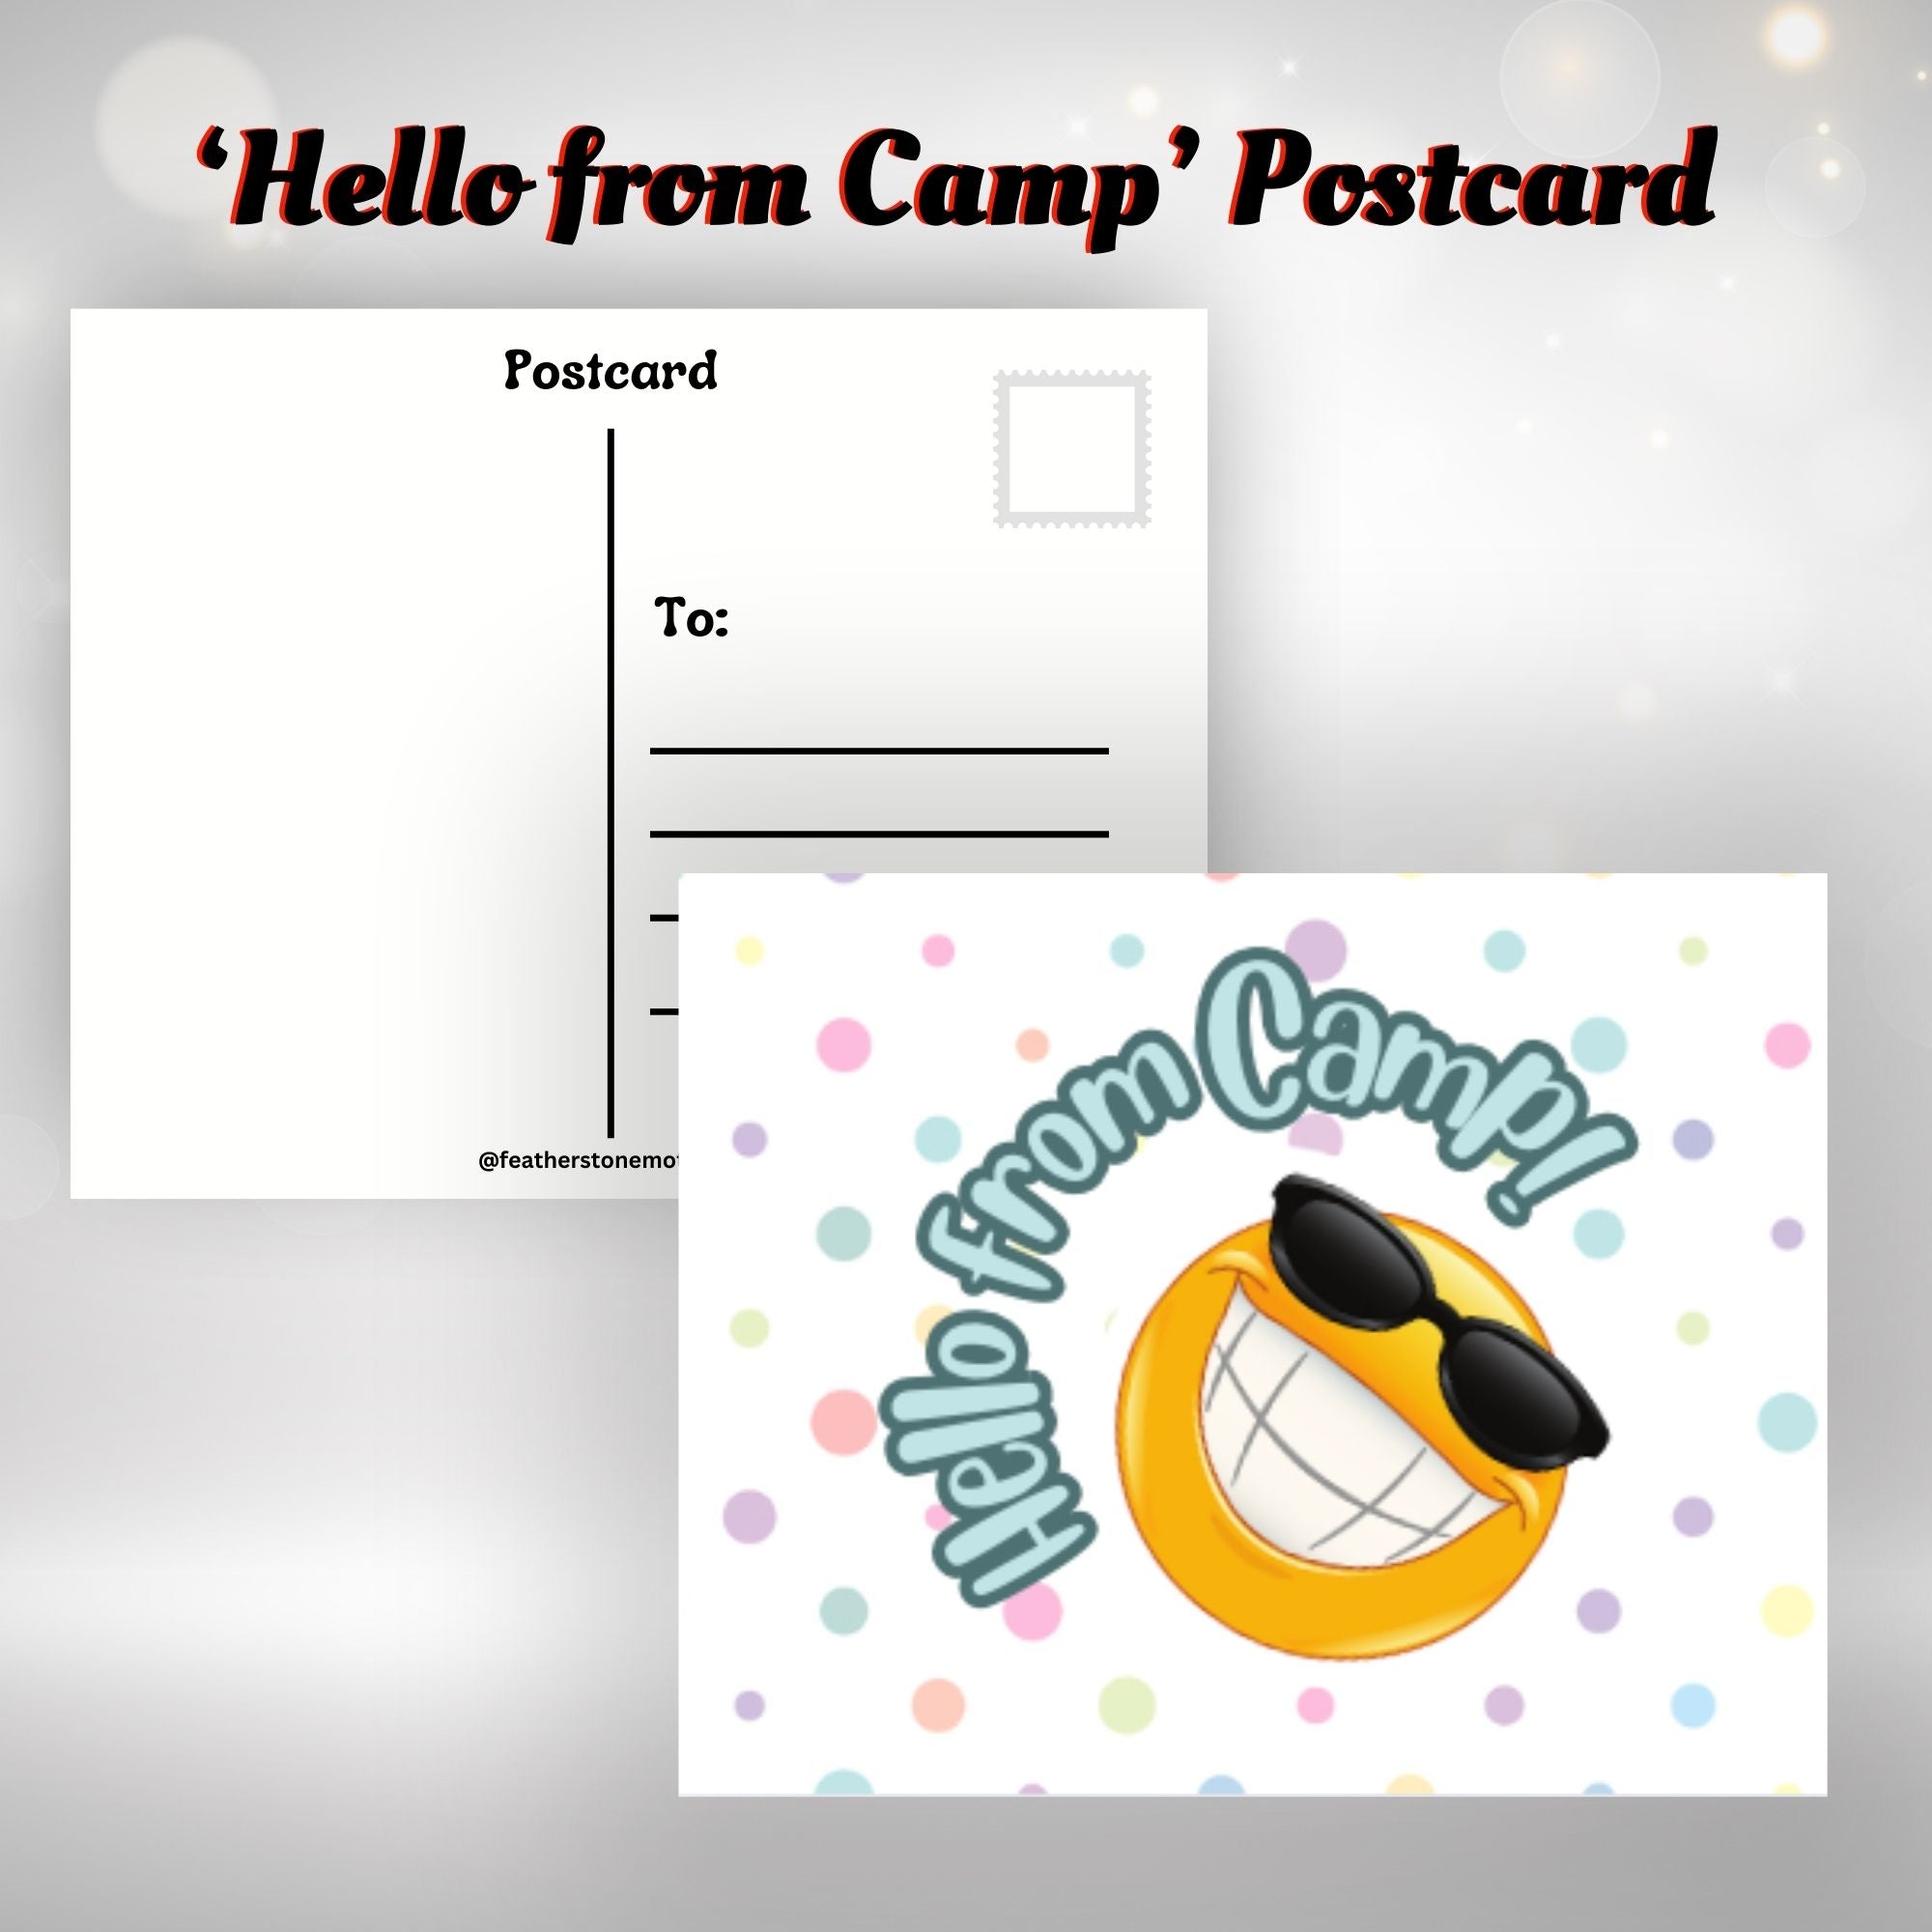 This image shows the Hello from Camp! with a smiley face wearing sunglasses.